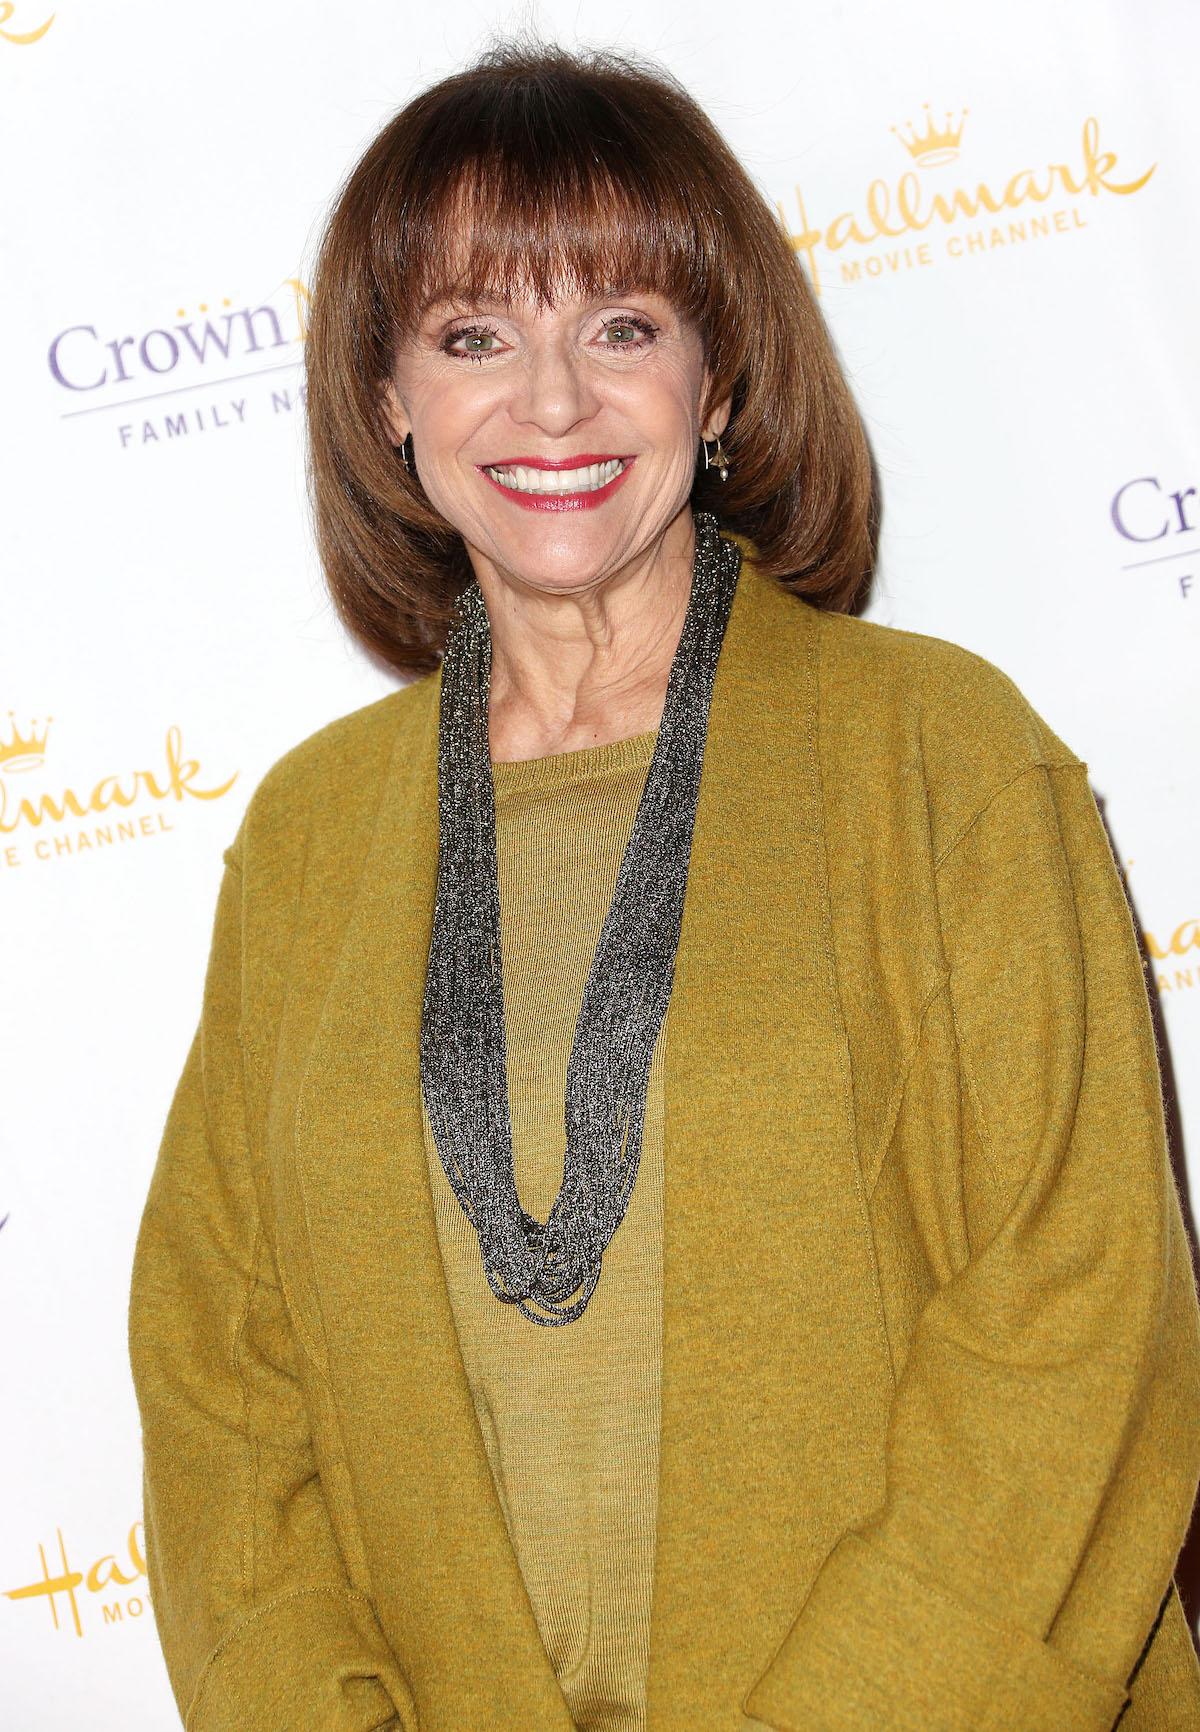 Actress Valerie Harper at The Huntington Library and Gardens in San Marino, California, on Jan. 11, 2014. (Frederick M. Brown/Getty Images)